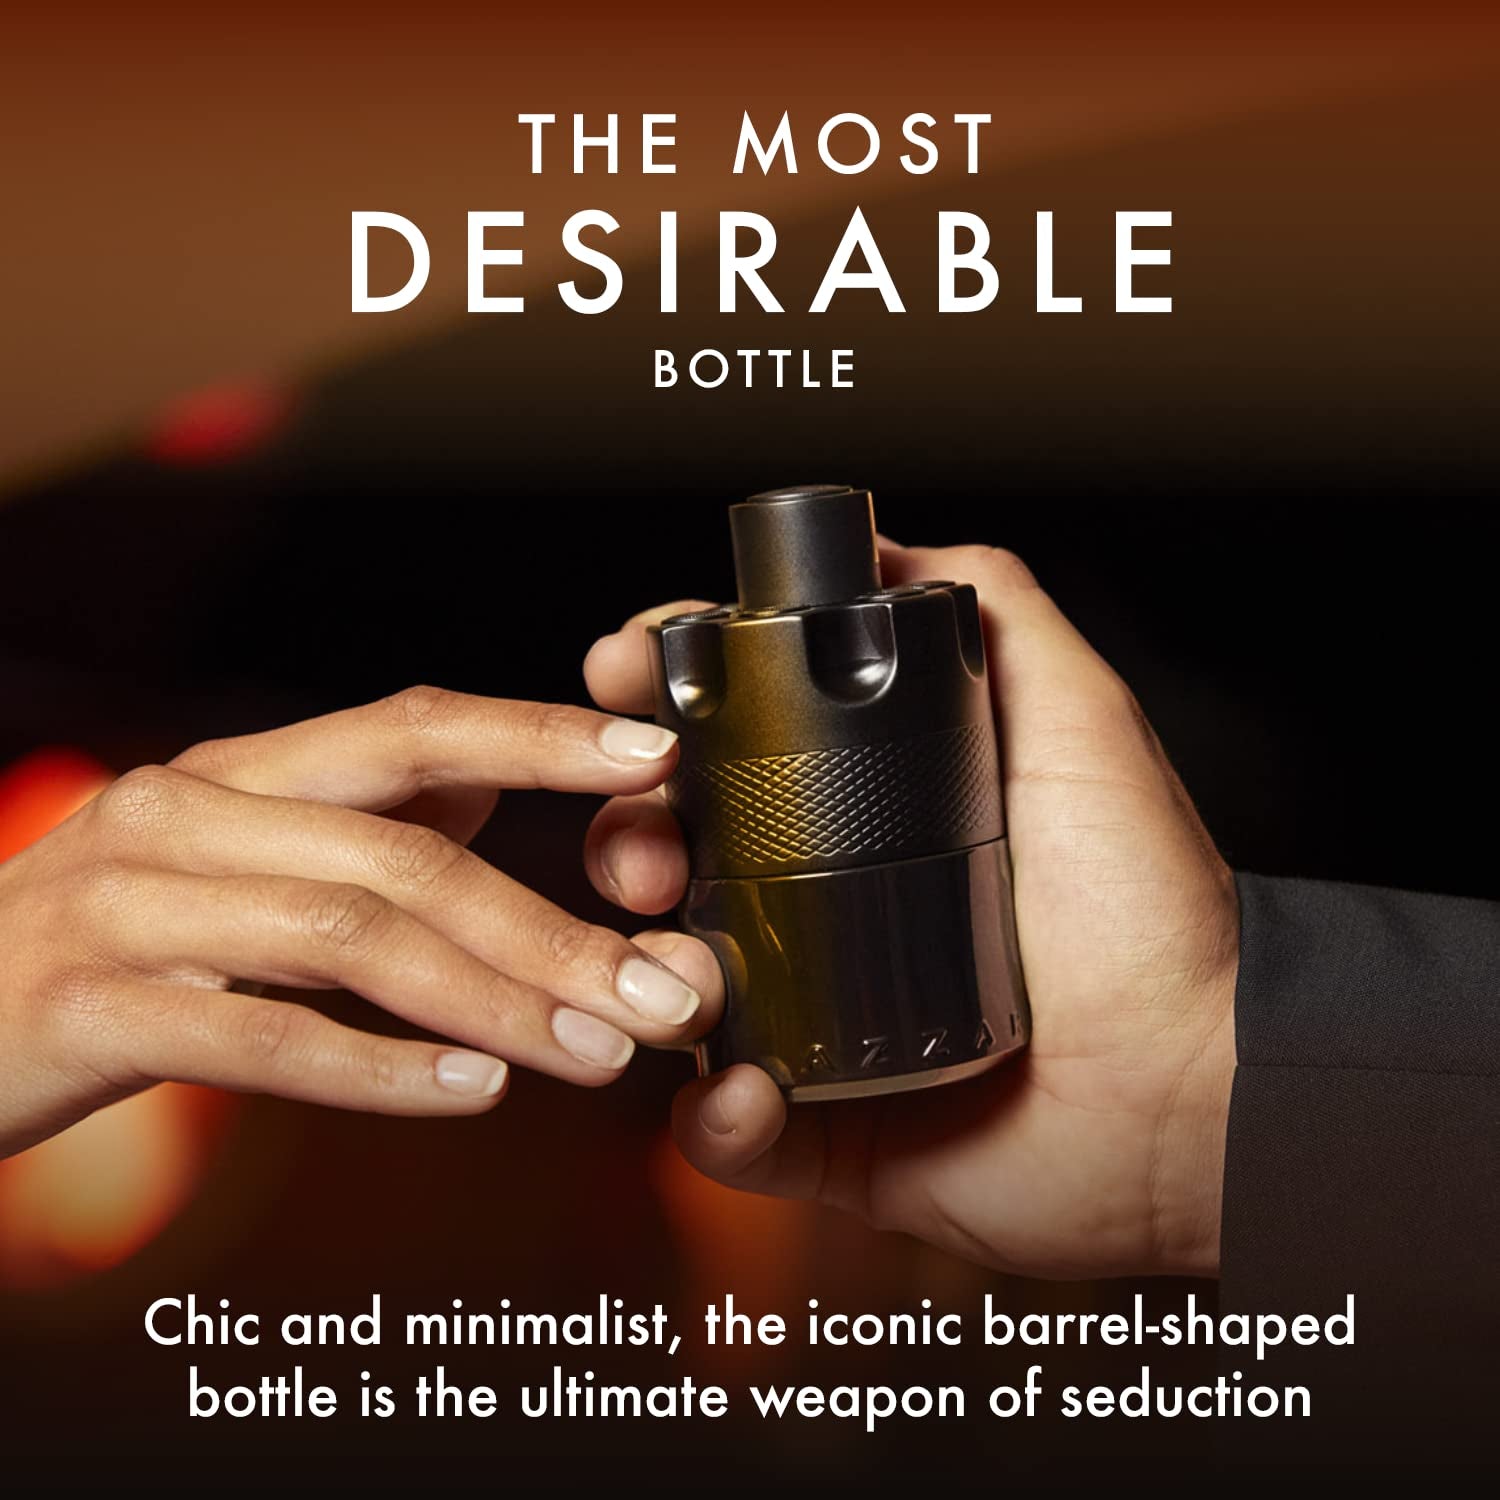 the Most Wanted Eau De Parfum Intense - Seductive Mens Cologne - Fougère, Ambery & Spicy Fragrance for Date - Lasting Wear - Luxury Perfumes for Men